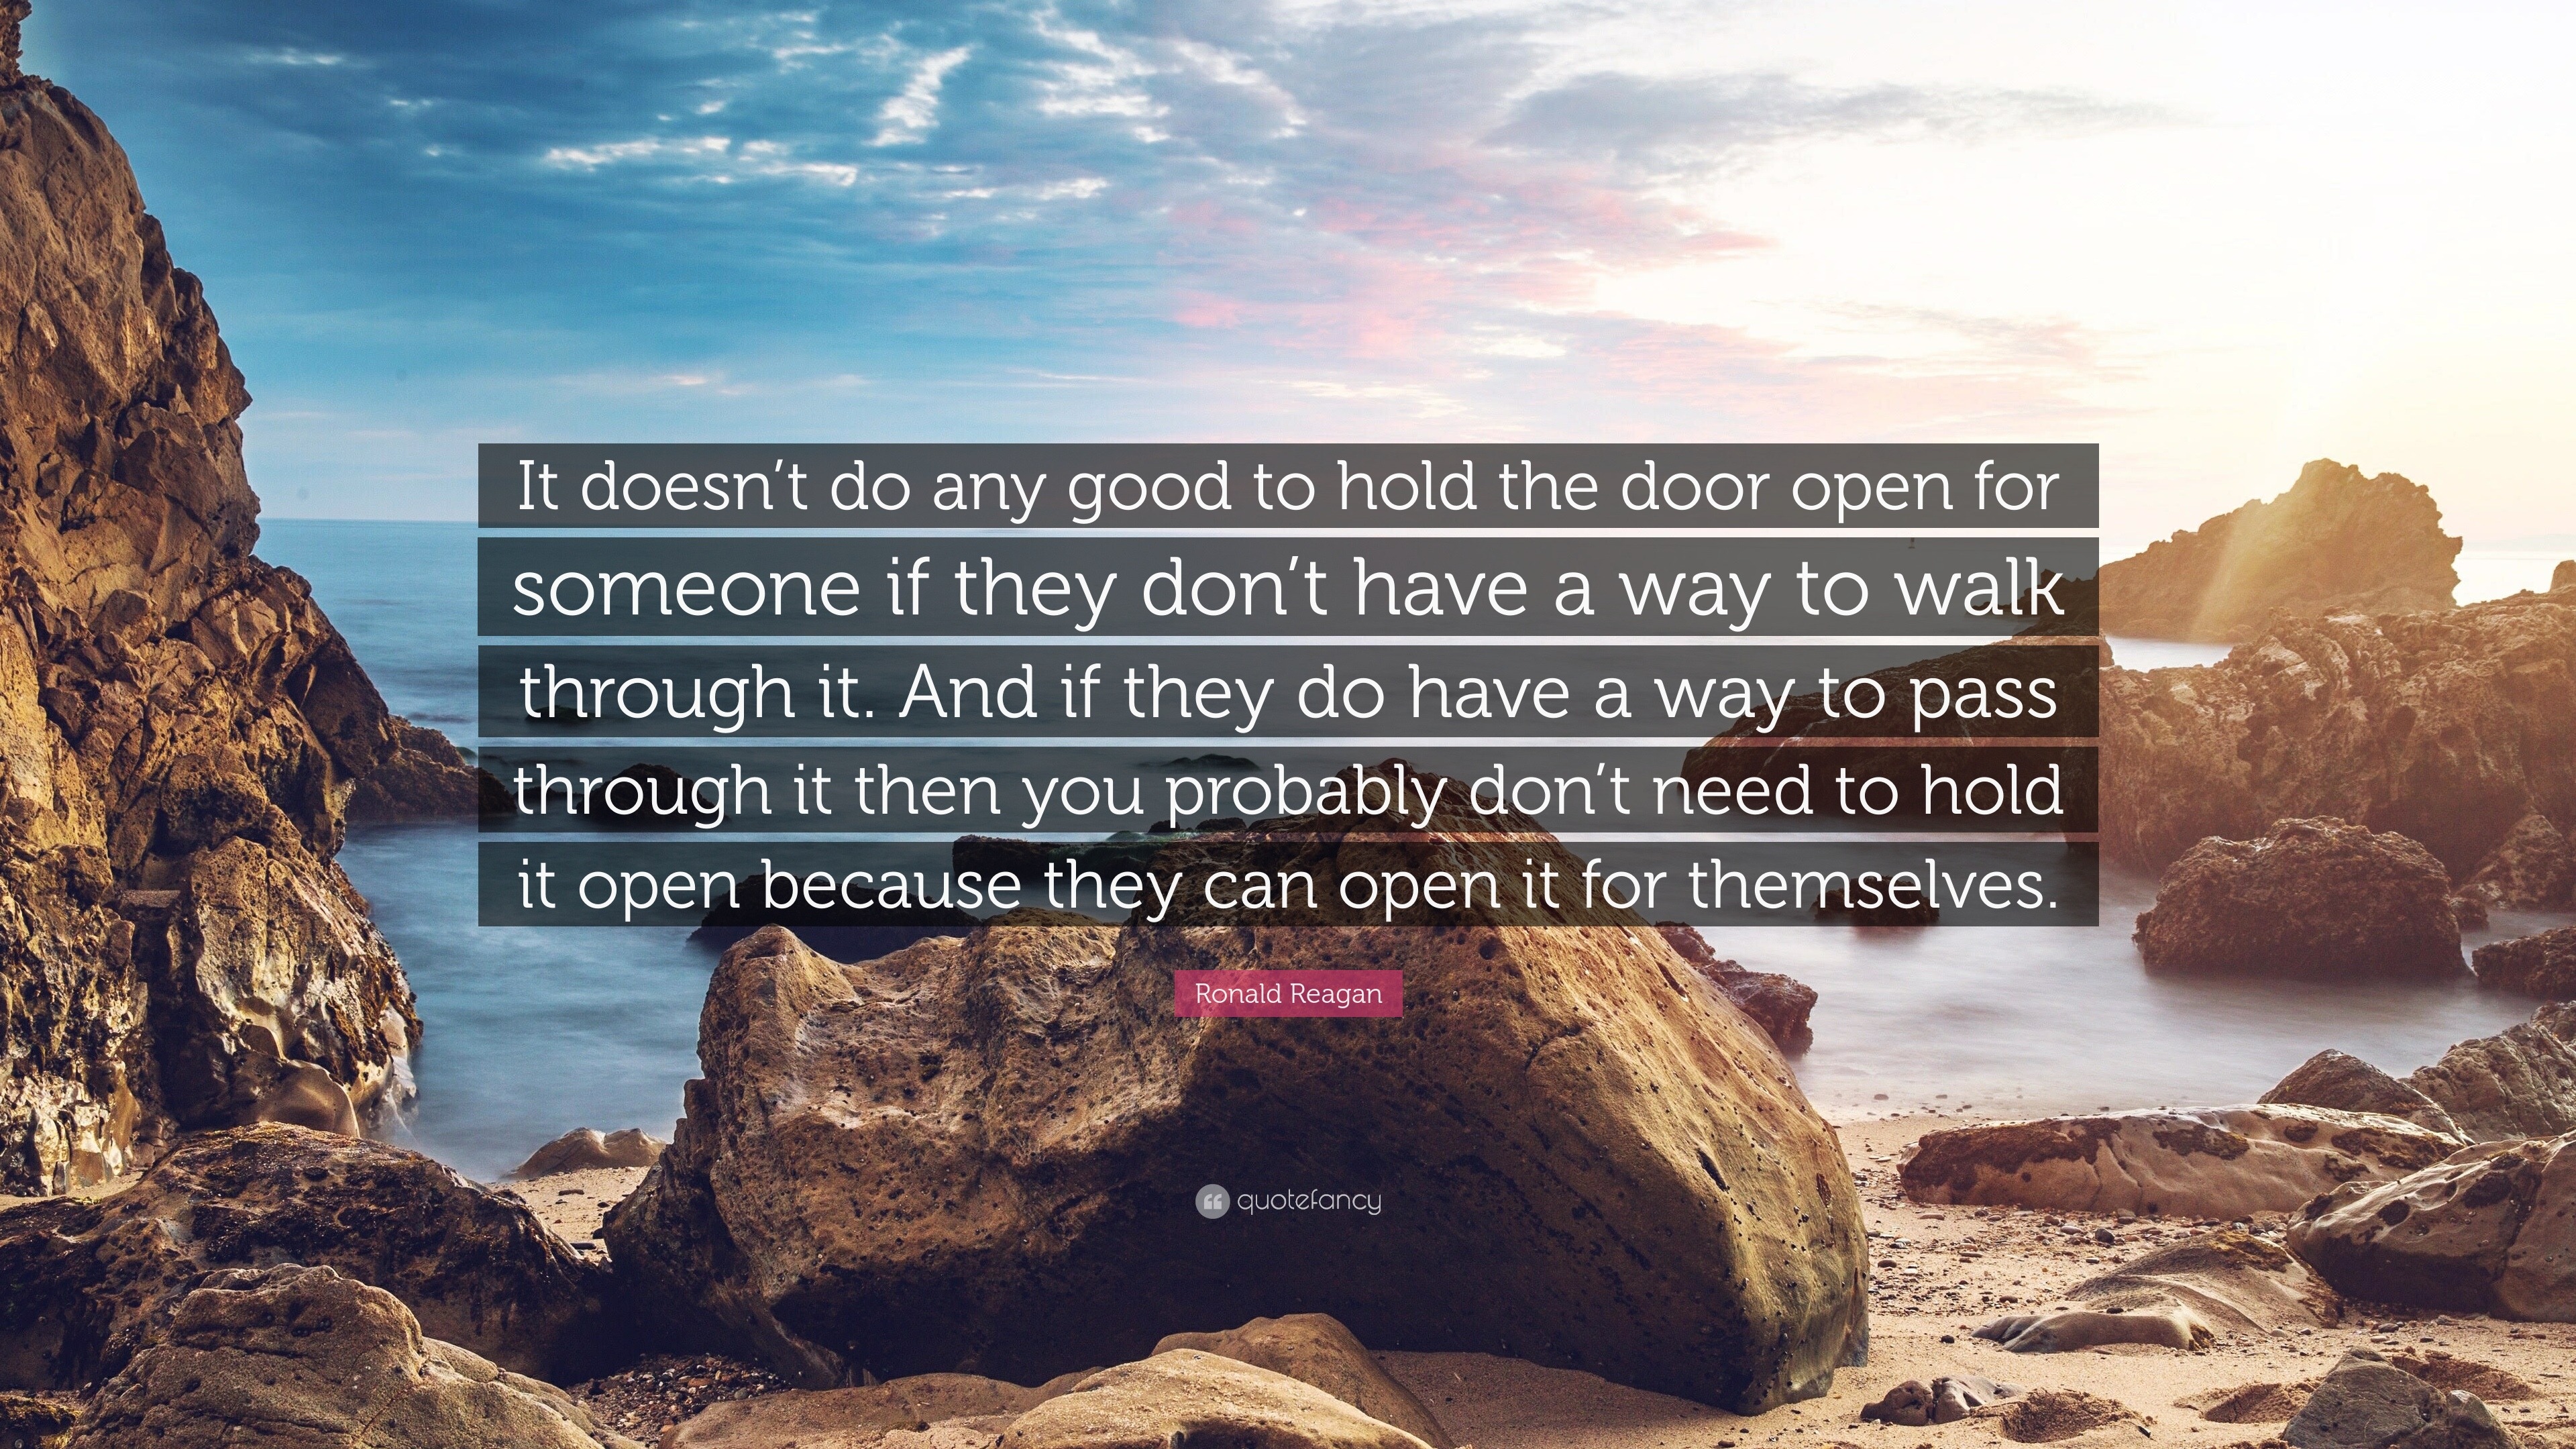 Ronald Reagan Quote: “It doesn’t do any good to hold the door open for ...